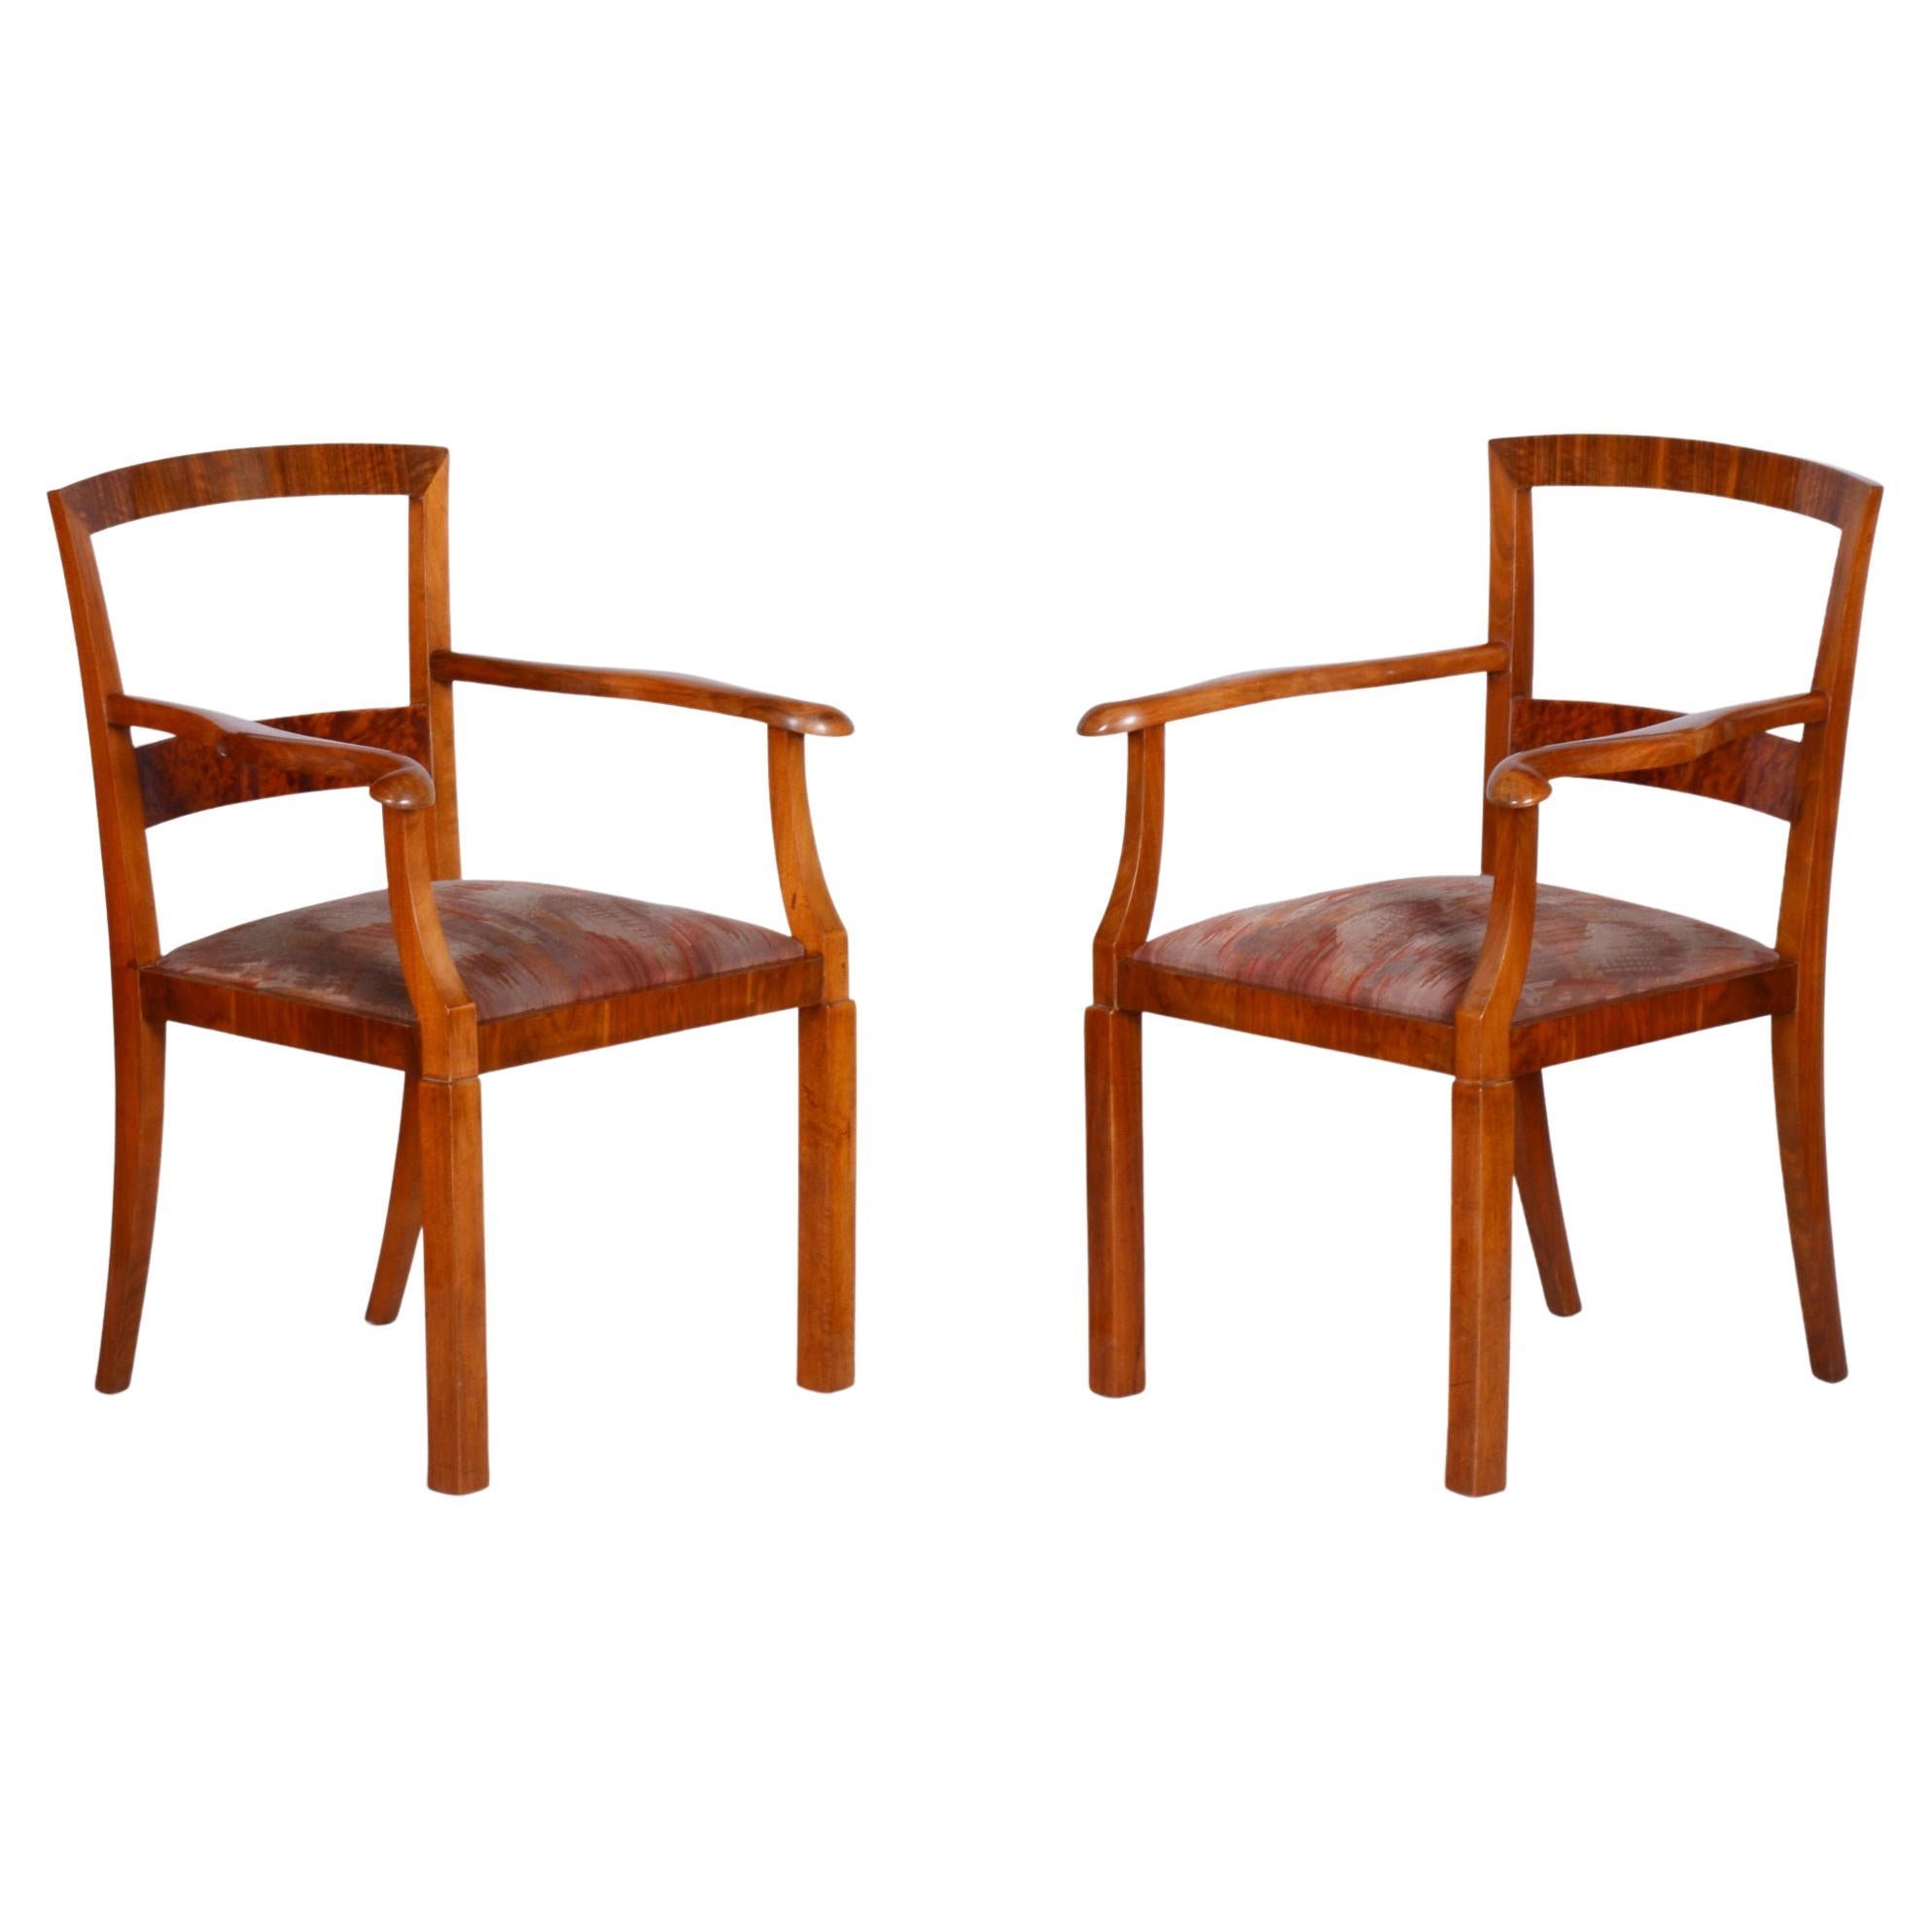 Pair of Brown ArtDeco Beech Armchairs, 1920s, Original Upholstery For Sale